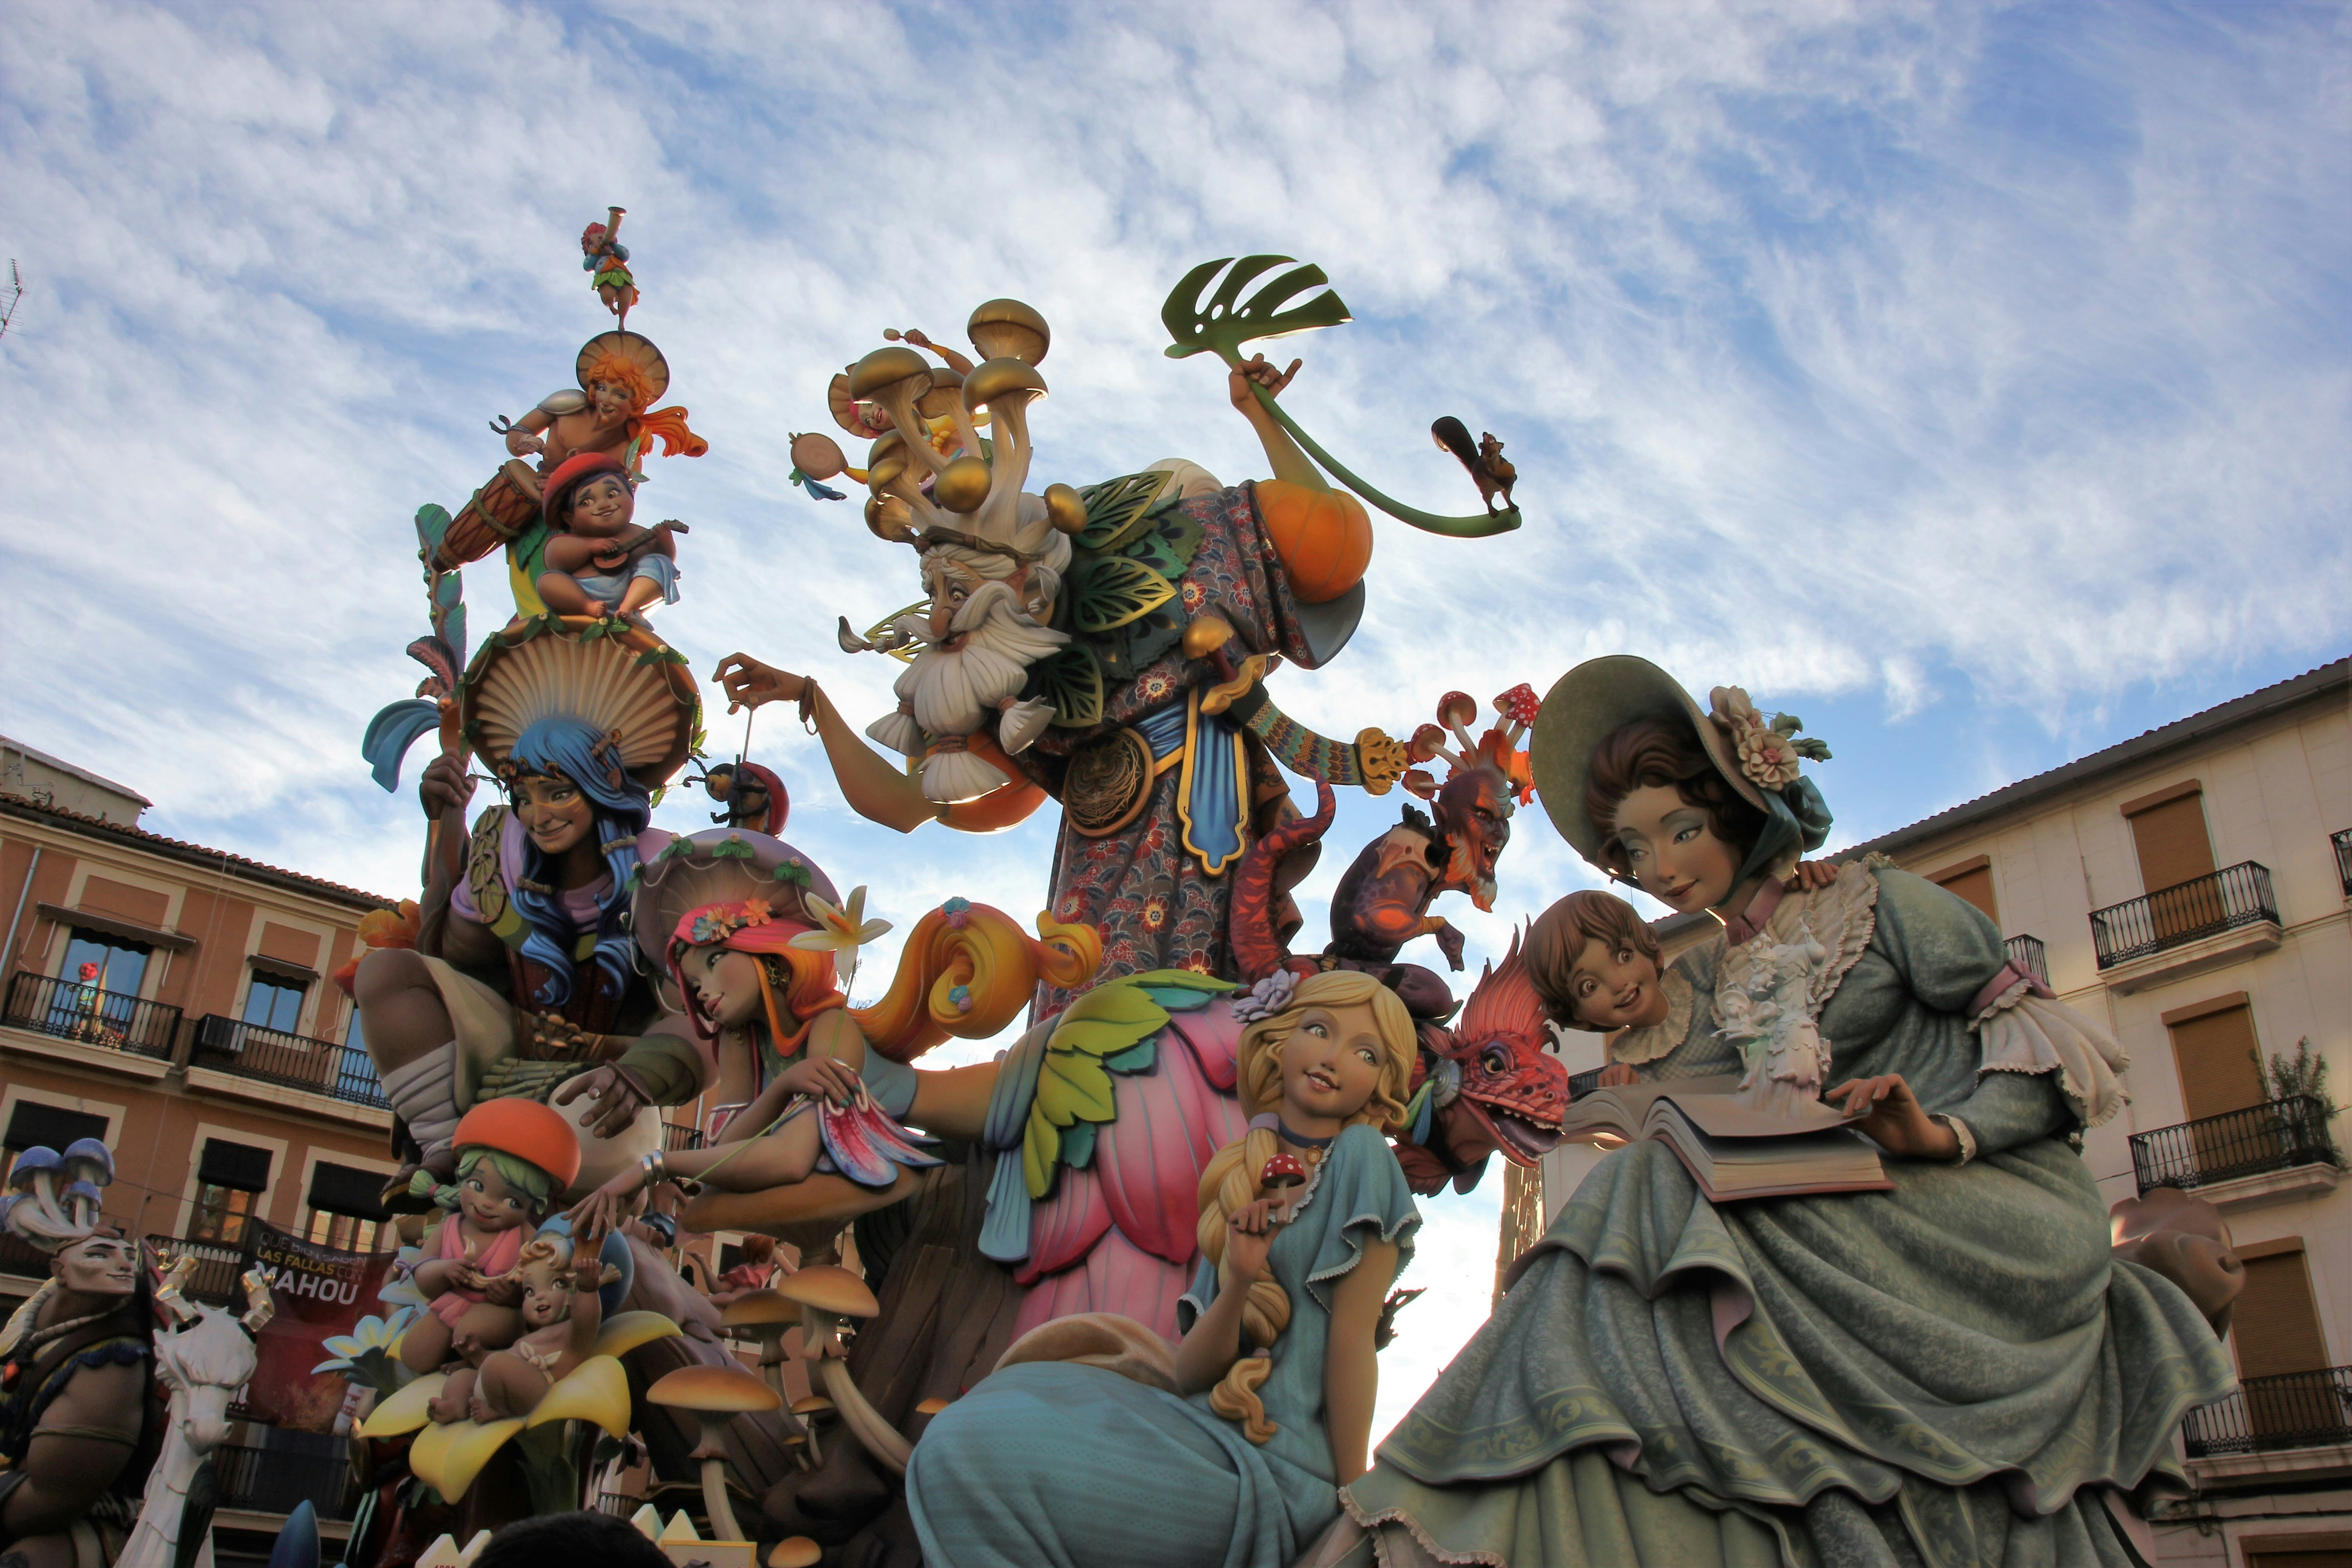 An elaborate sculpture created for Las Fallas; several colourful figures are gathered in a storybook scene, and the individual figures are perhaps characters from the story.